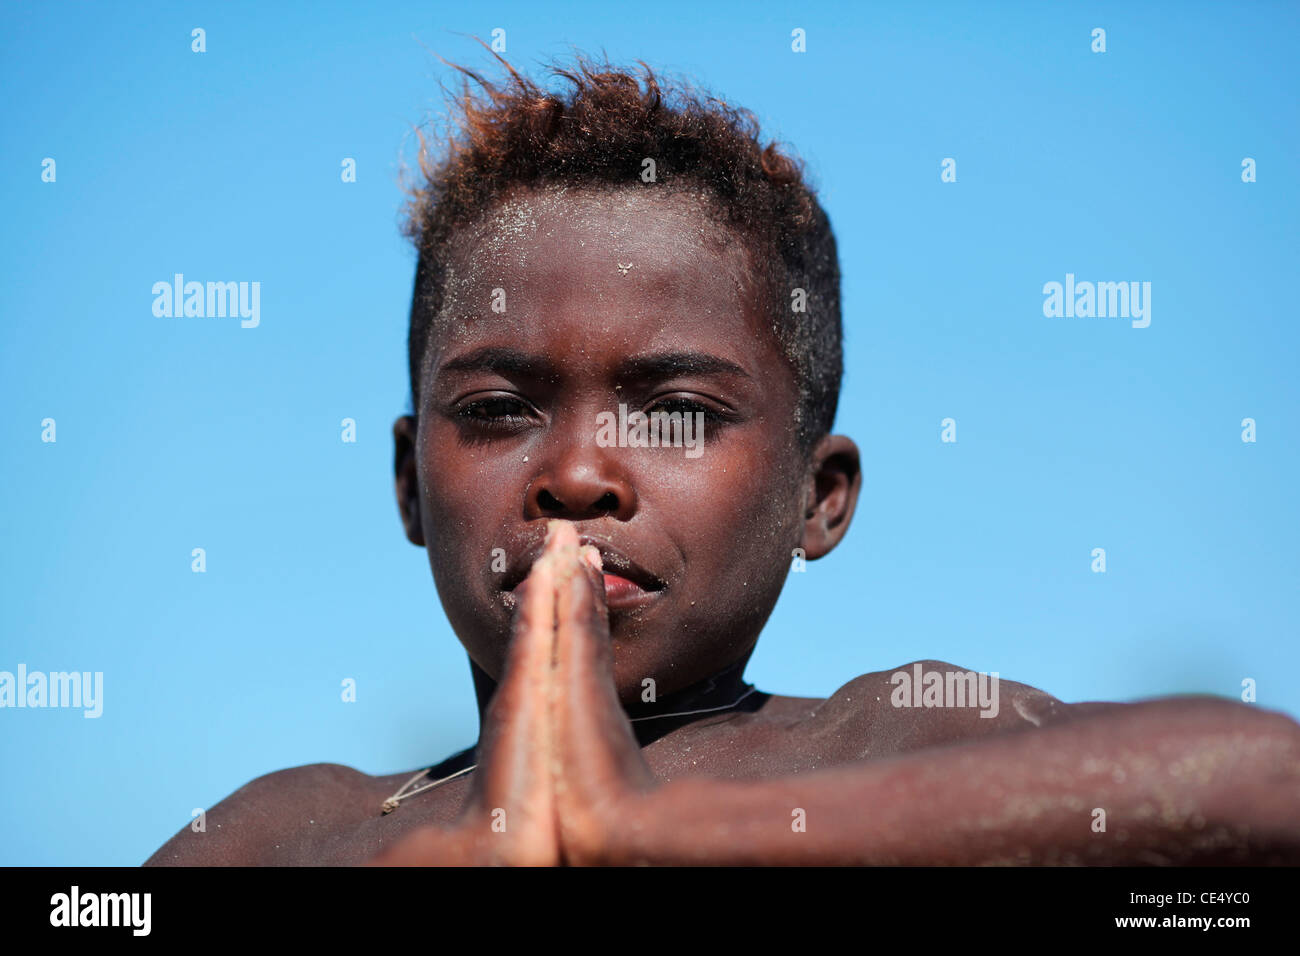 Portrait of a malagasy boy of the Vezo ethnic group in a praying or martial arts stance, near Morondava, Madagascar. Stock Photo